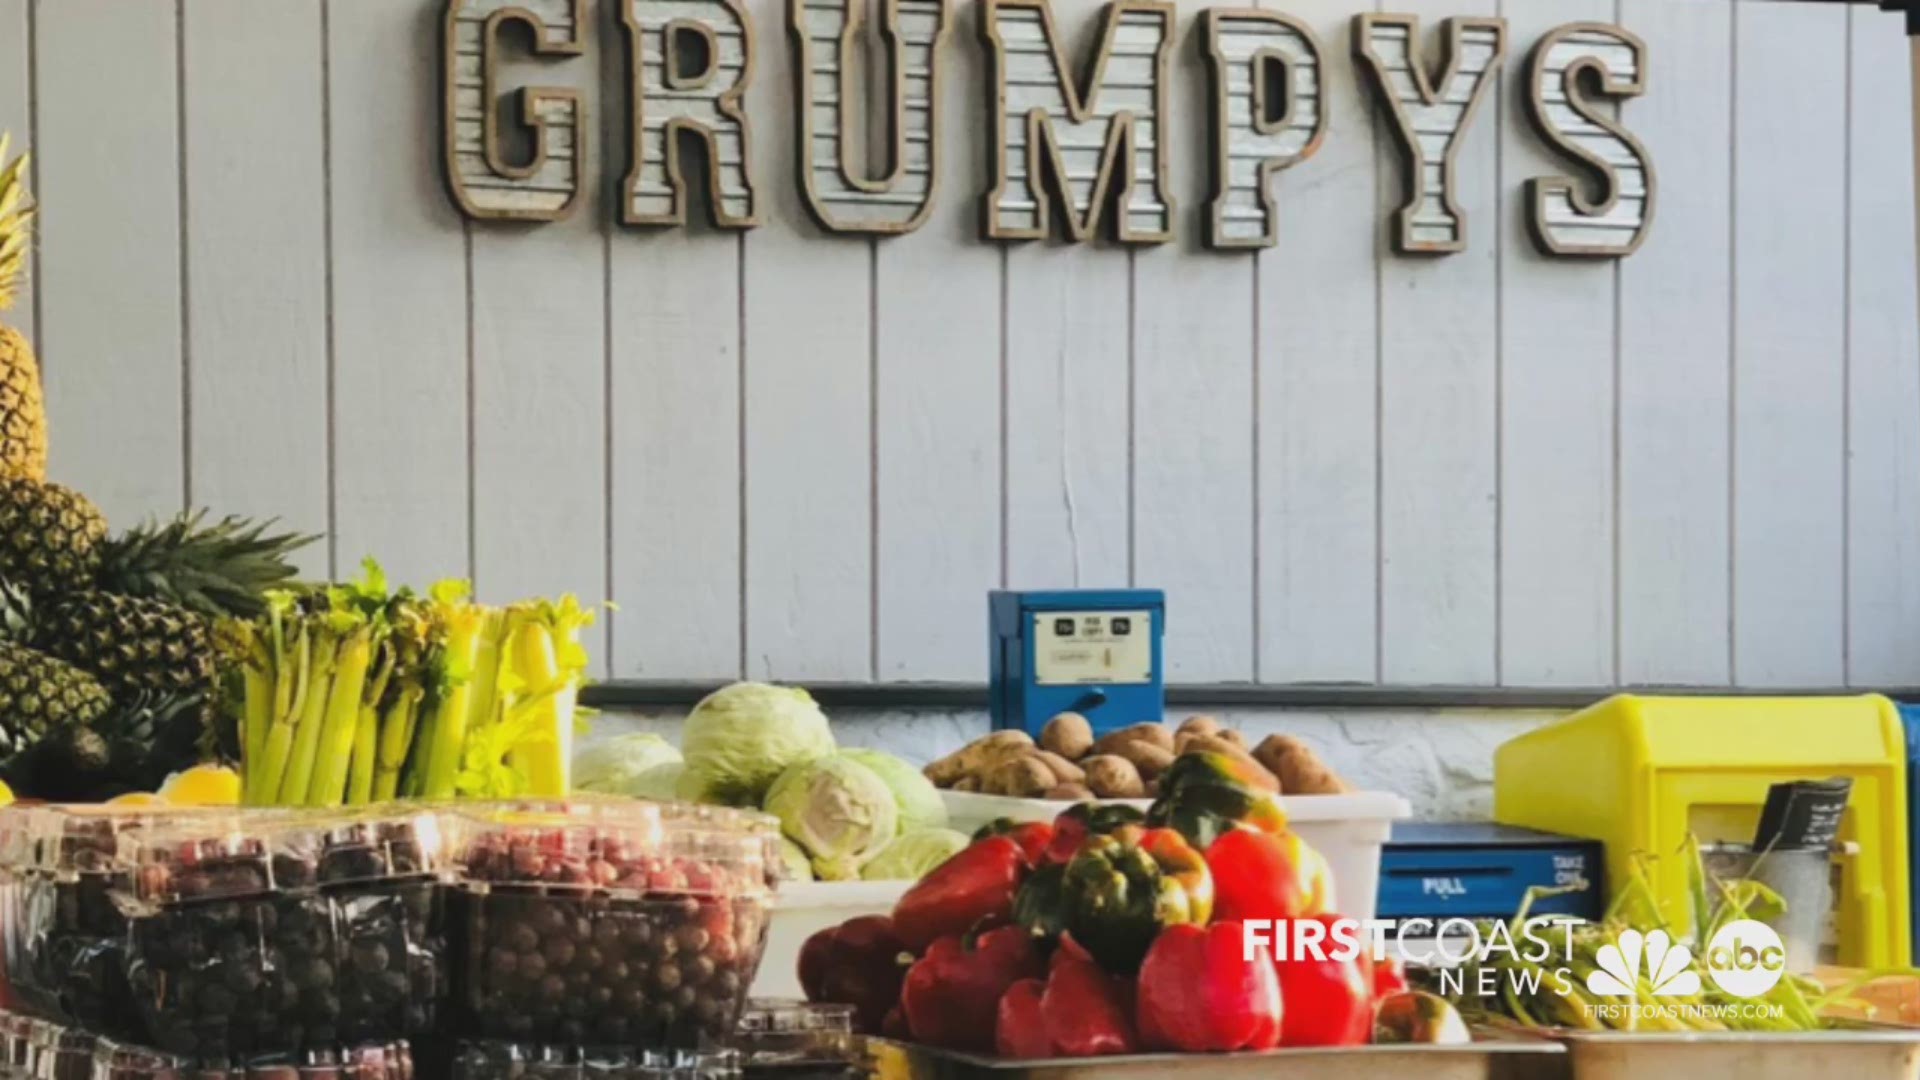 Grumpy's, an American-style diner in Orange Park, is holding daily Produce & Pantry Giveaways to keep the community fed.